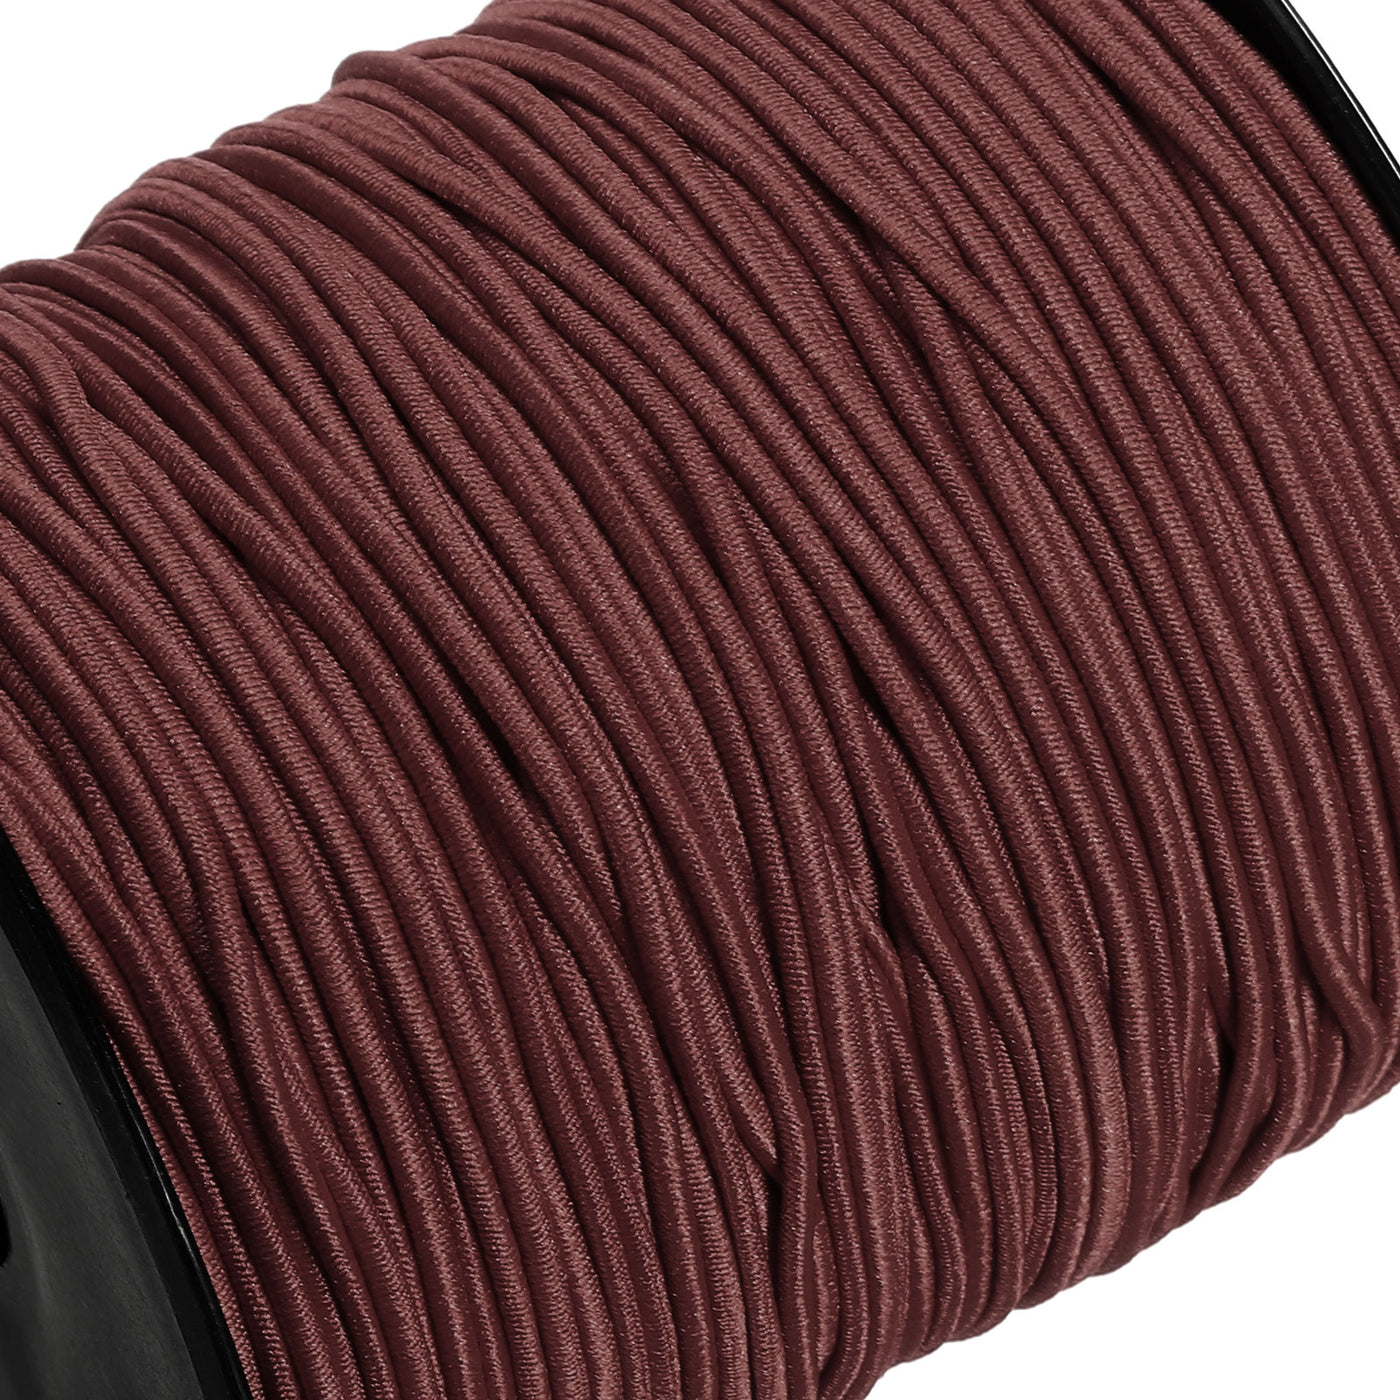 Harfington Elastic Cord Stretchy String 1.5mm 109 Yards Dark Brown for Crafts, Jewelry Making, Bracelets, Necklaces, Beading